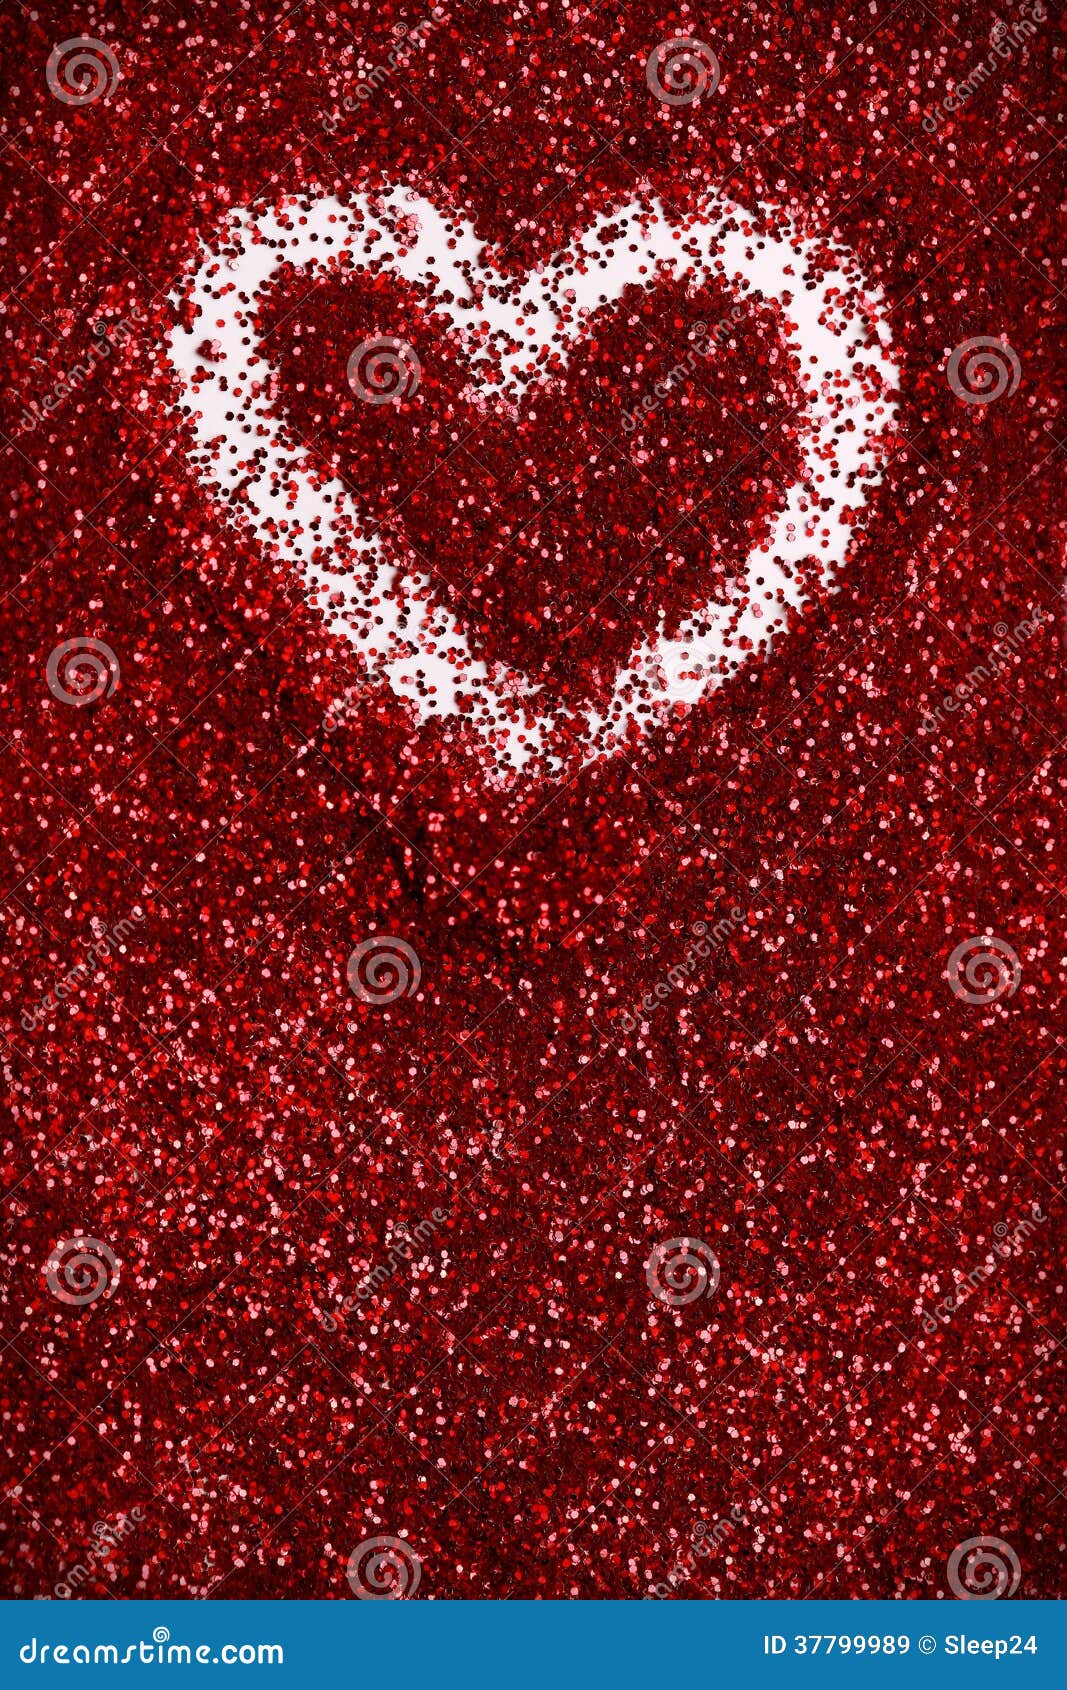 Red Glitter Hearts Valentine S Day Abstract Background Love Sparkle Stock  Image - Image of concept, romantic: 37799989